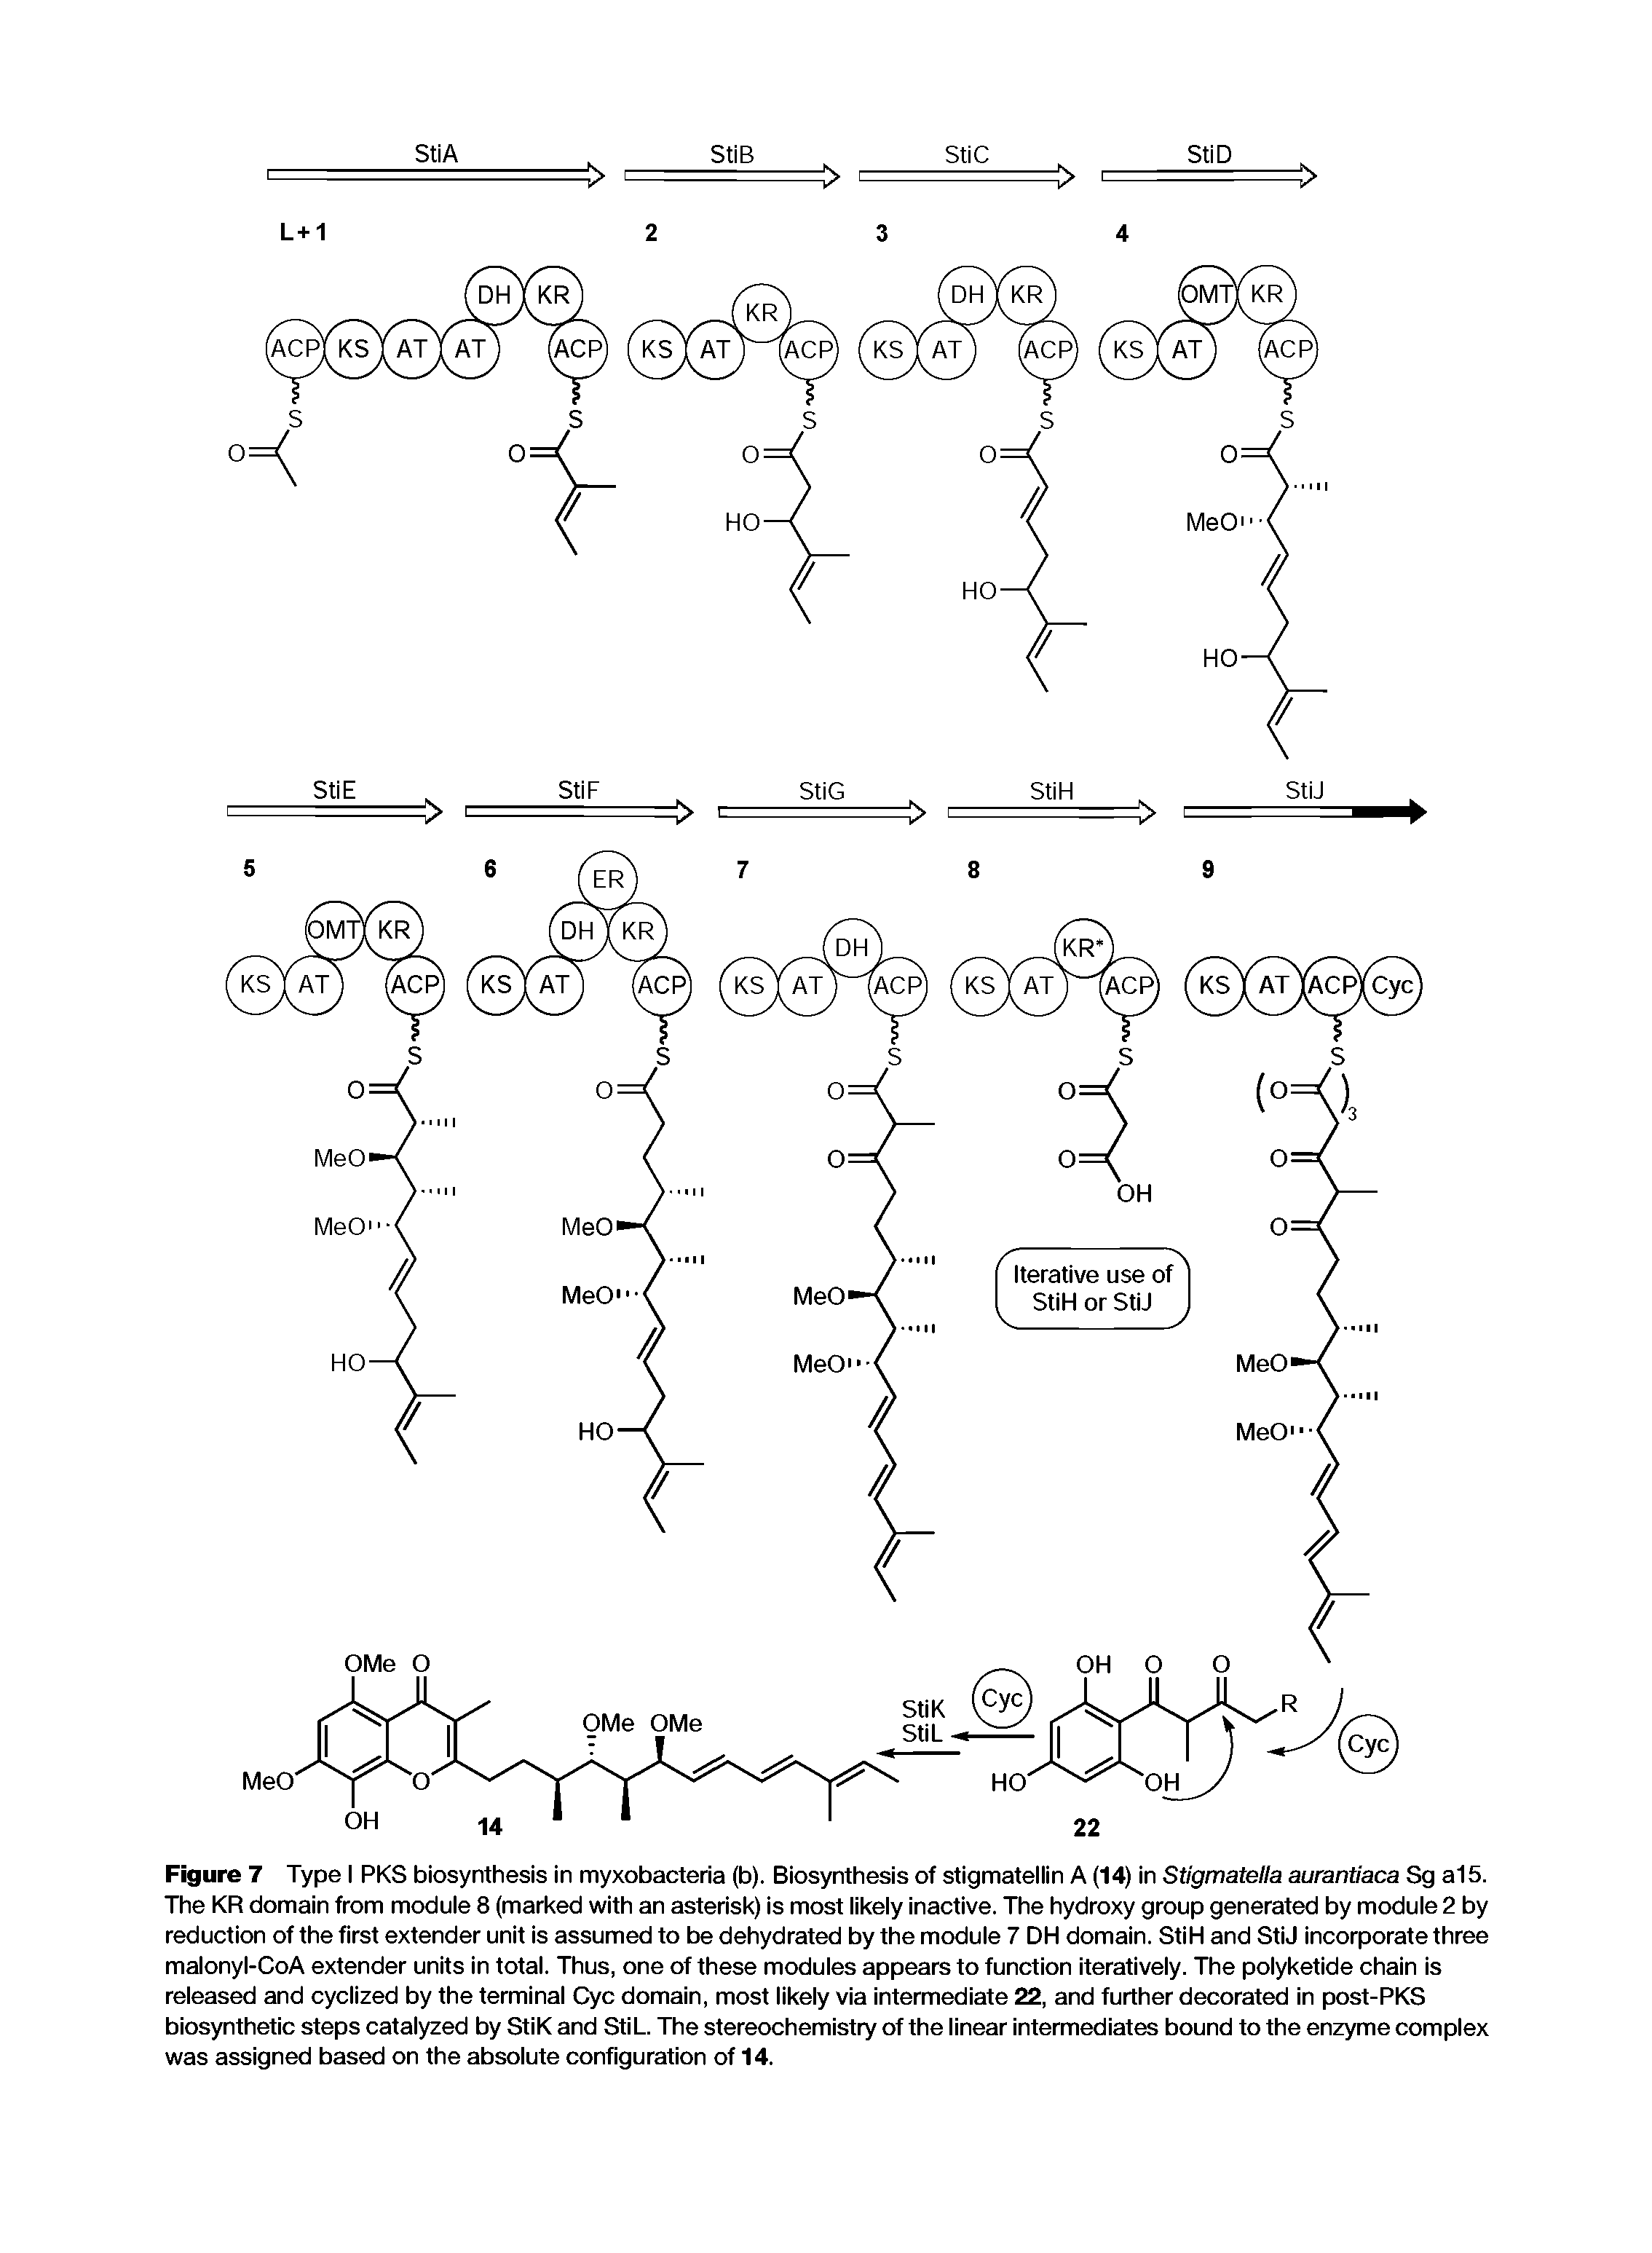 Figure 7 Type I PKS biosynthesis in myxobacteria (b). Biosynthesis of stigmatellin A (14) in Stigmatella aurantiaca Sg a15. The KR domain from module 8 (marked with an asterisk) is most likely inactive. The hydroxy group generated by module 2 by reduction of the first extender unit is assumed to be dehydrated by the module 7 DH domain. StiH and StiJ incorporate three malonyl-CoA extender units in total. Thus, one of these modules appears to function iteratively. The polyketide chain is released and cyclized by the terminal Cyc domain, most likely via intermediate 22, and further decorated in post-PKS biosynthetic steps catalyzed by StiK and StiL. The stereochemistry of the linear intermediates bound to the enzyme complex was assigned based on the absolute configuration of 14.